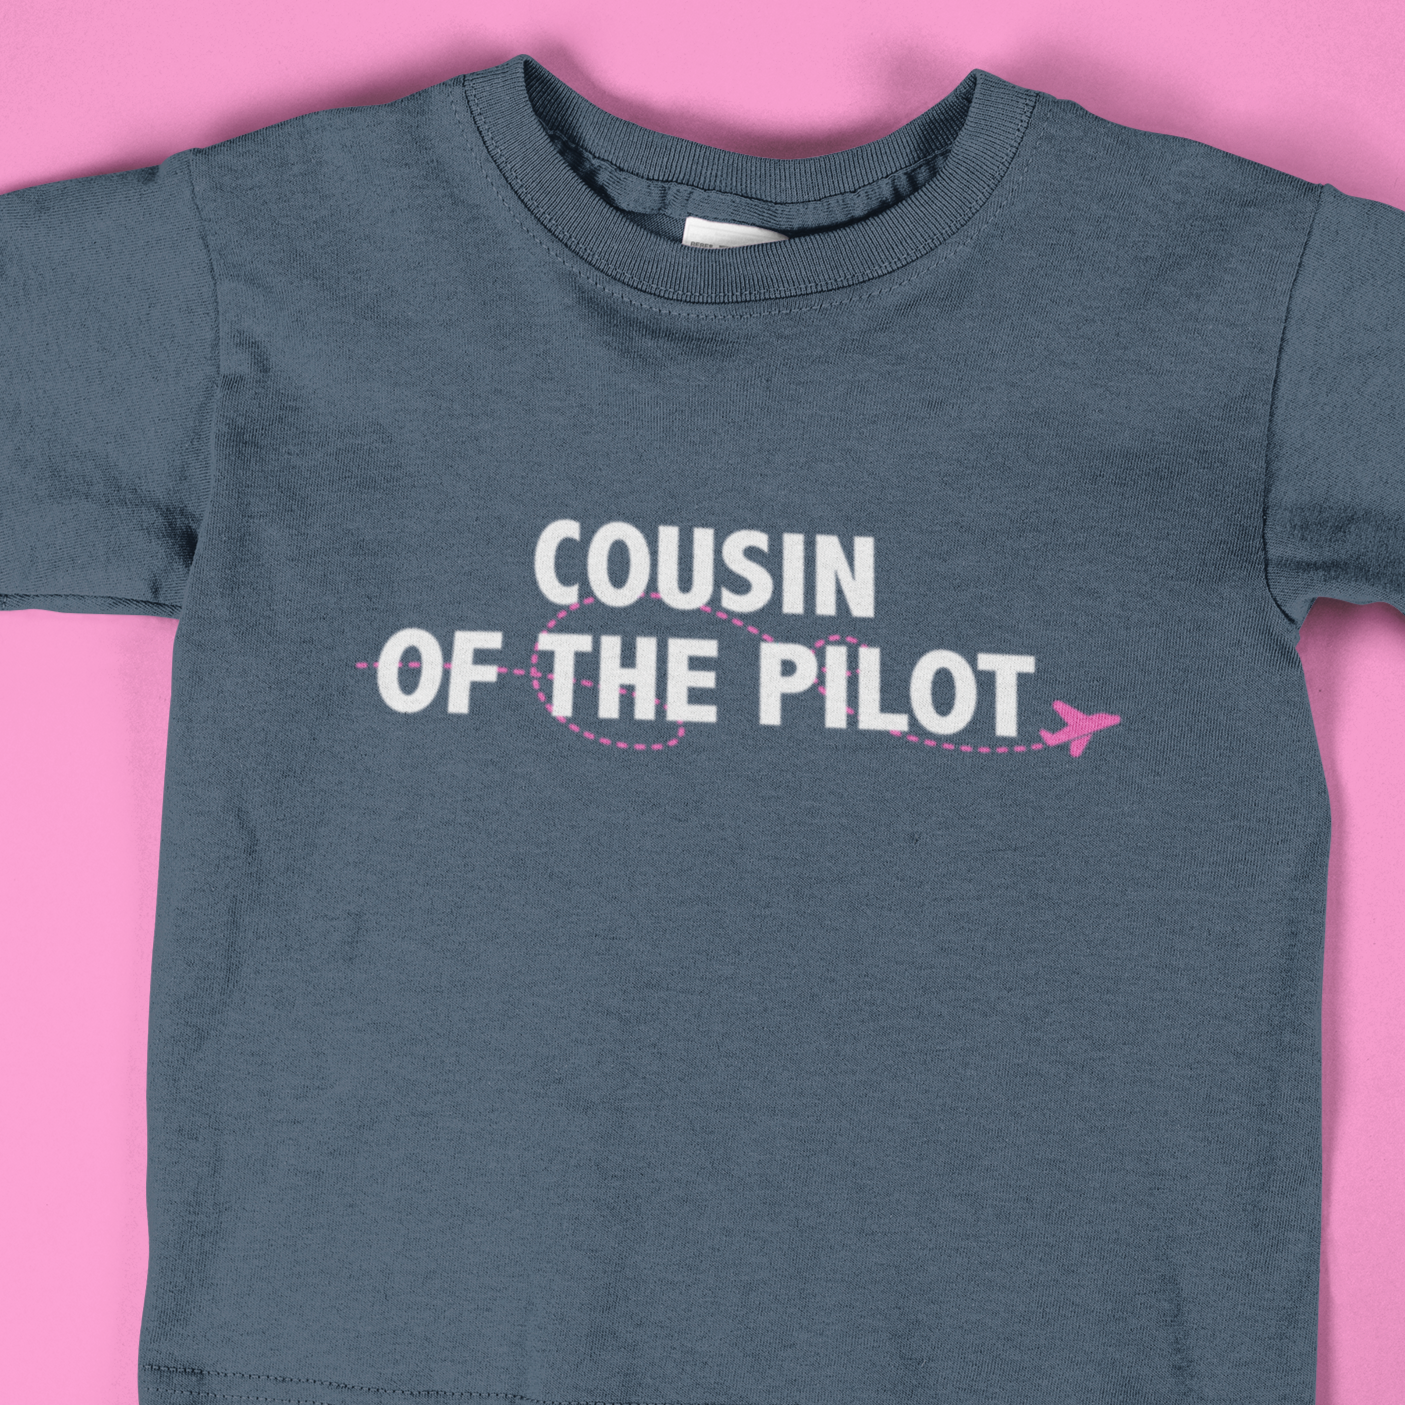 Cousin of the/a Pilot - Baby & Toddler T-shirts